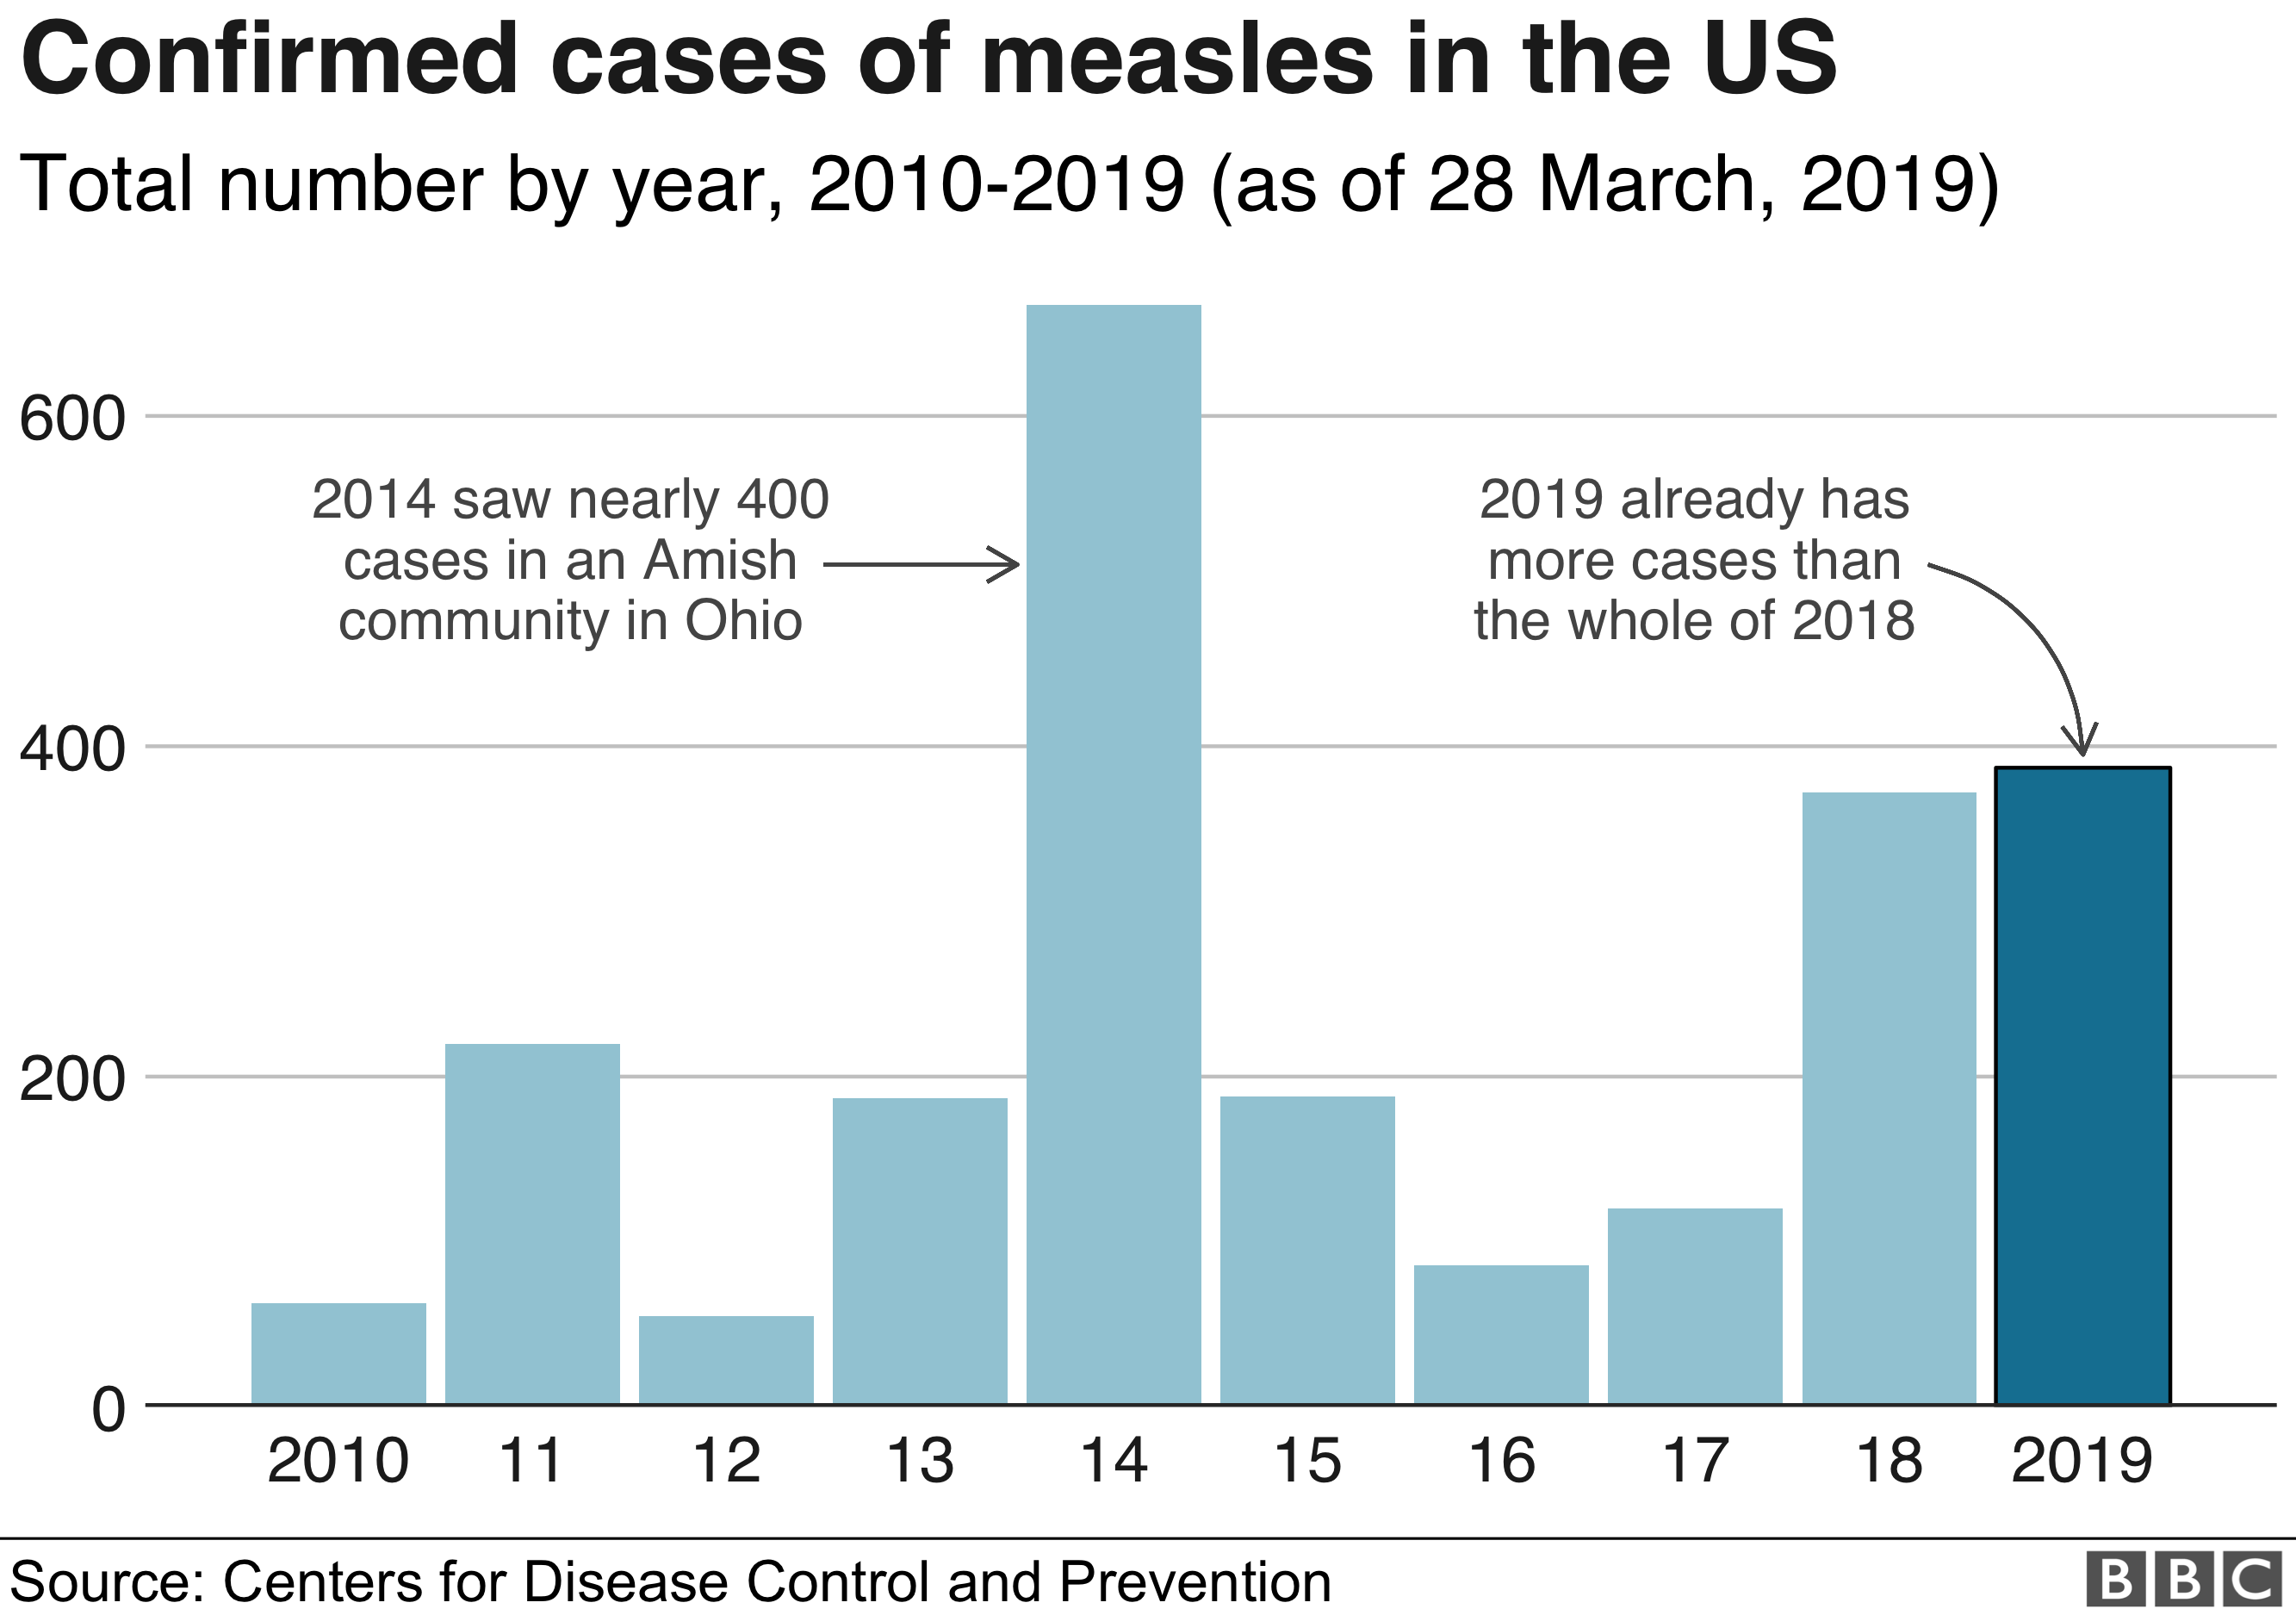 Chart showing confirmed cases of measles in the US, 2010-2019